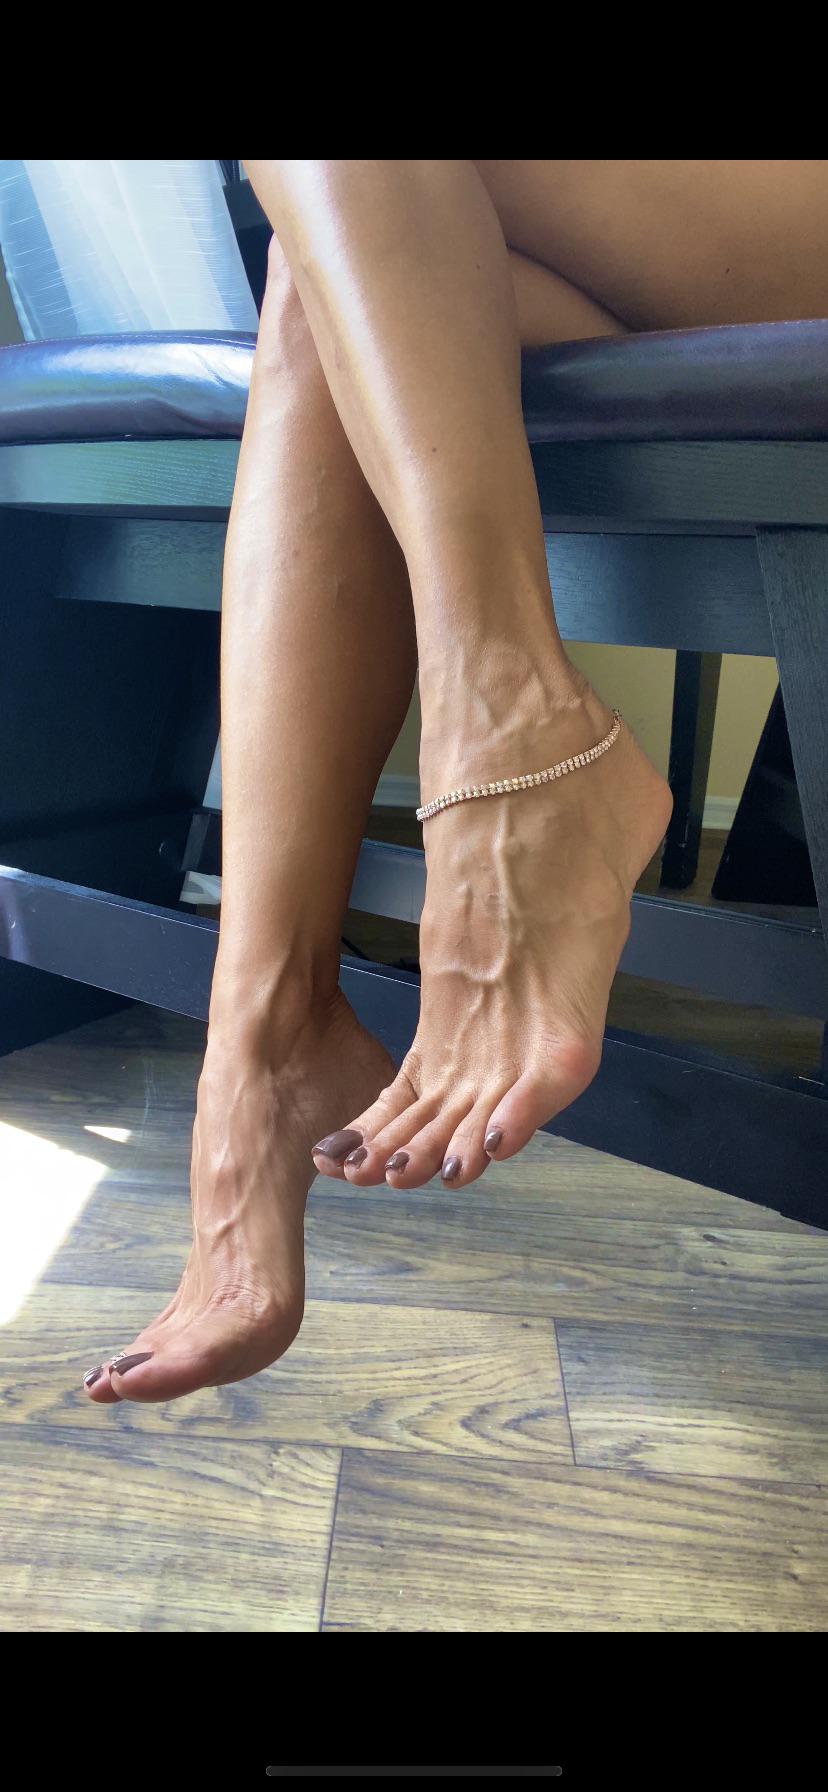 Mature Feet Pictures